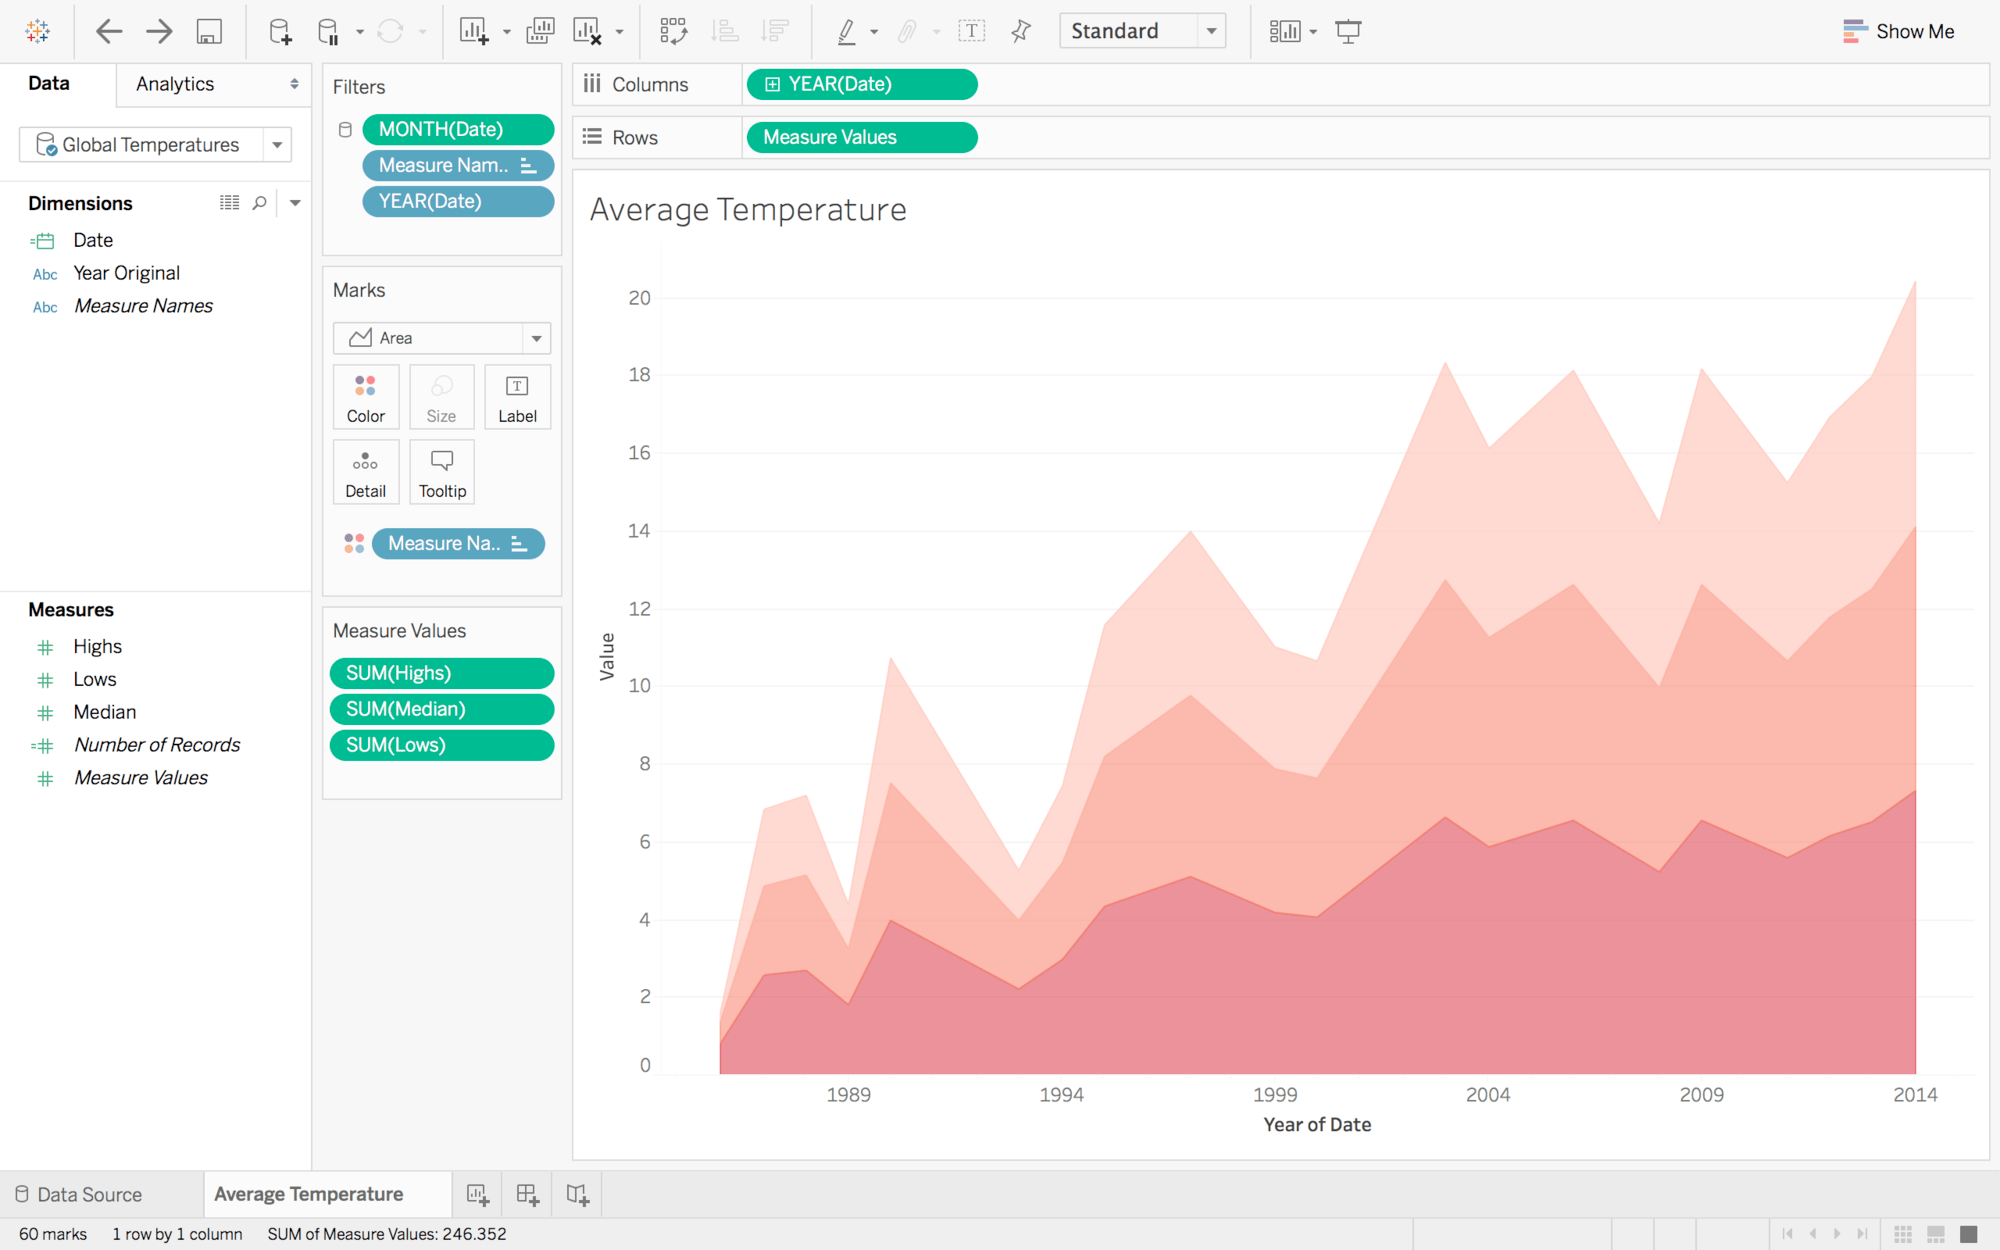 Time series analysis in Tableau